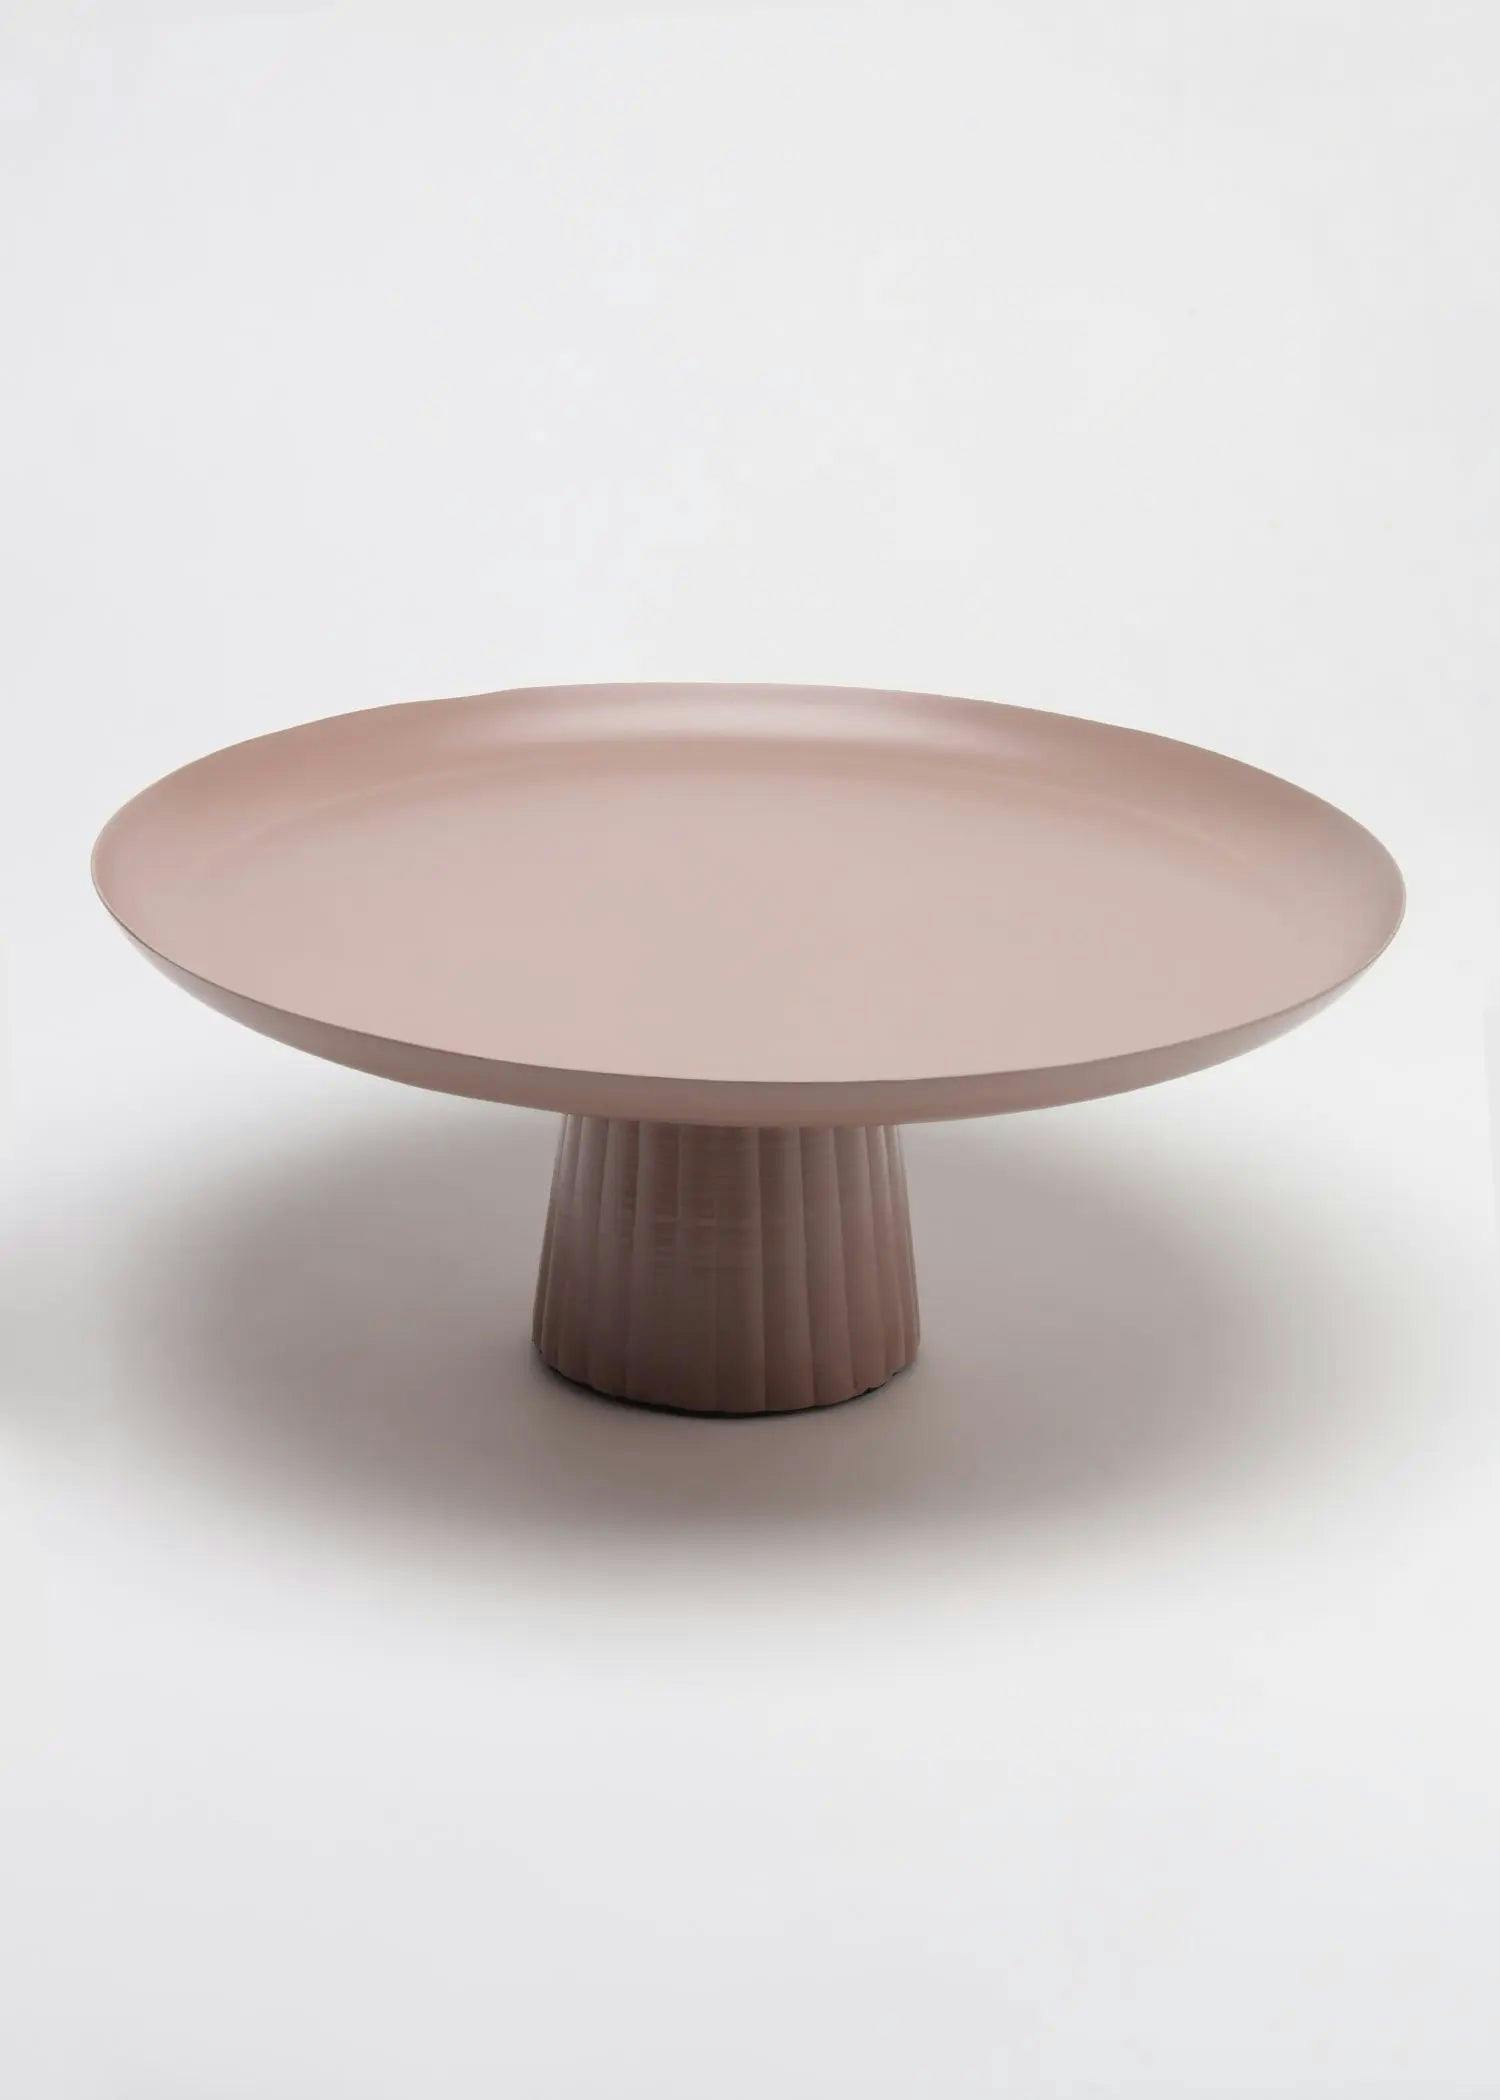 Avisa Cake Stand-Dusty Pink, a product by Gado Living